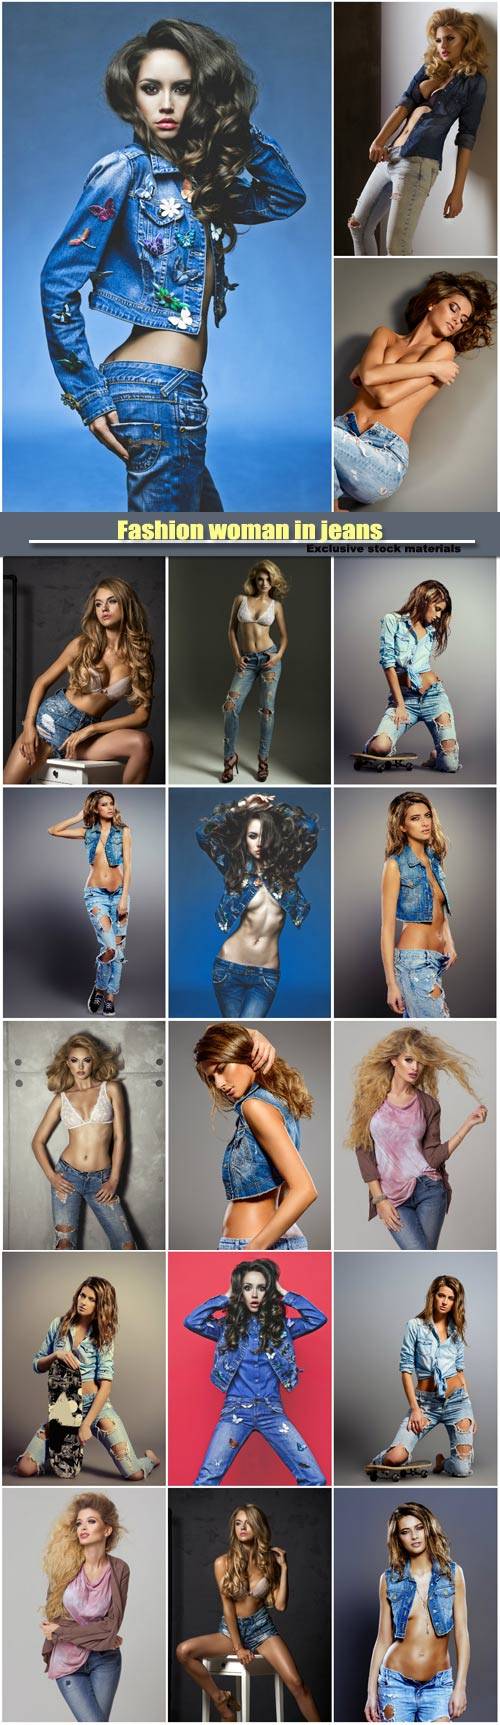 Fashion woman in jeans